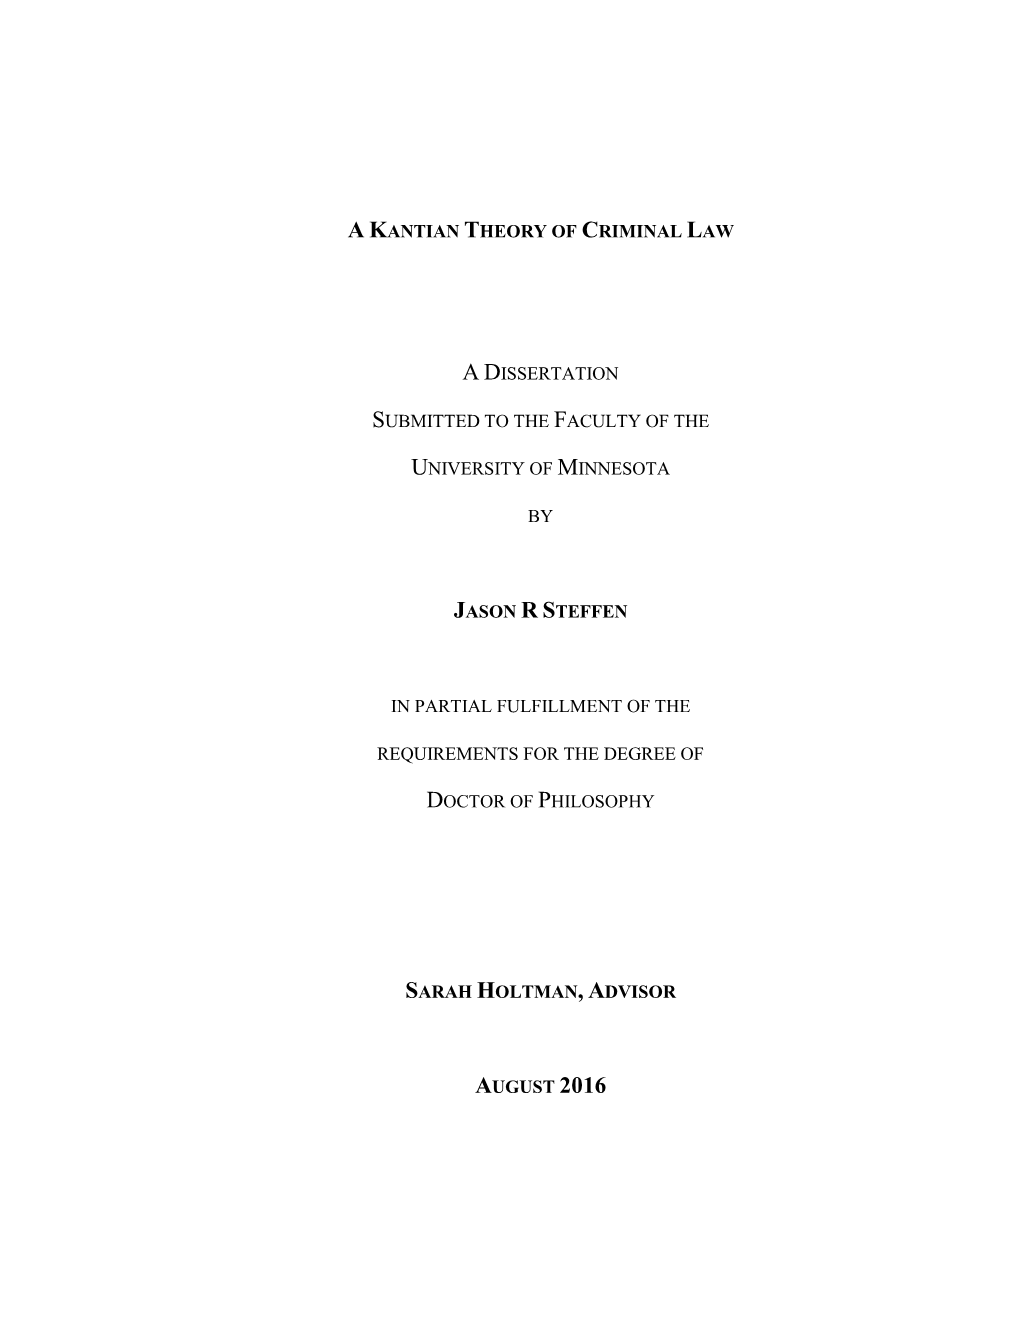 A Kantian Theory of Criminal Law a Dissertation